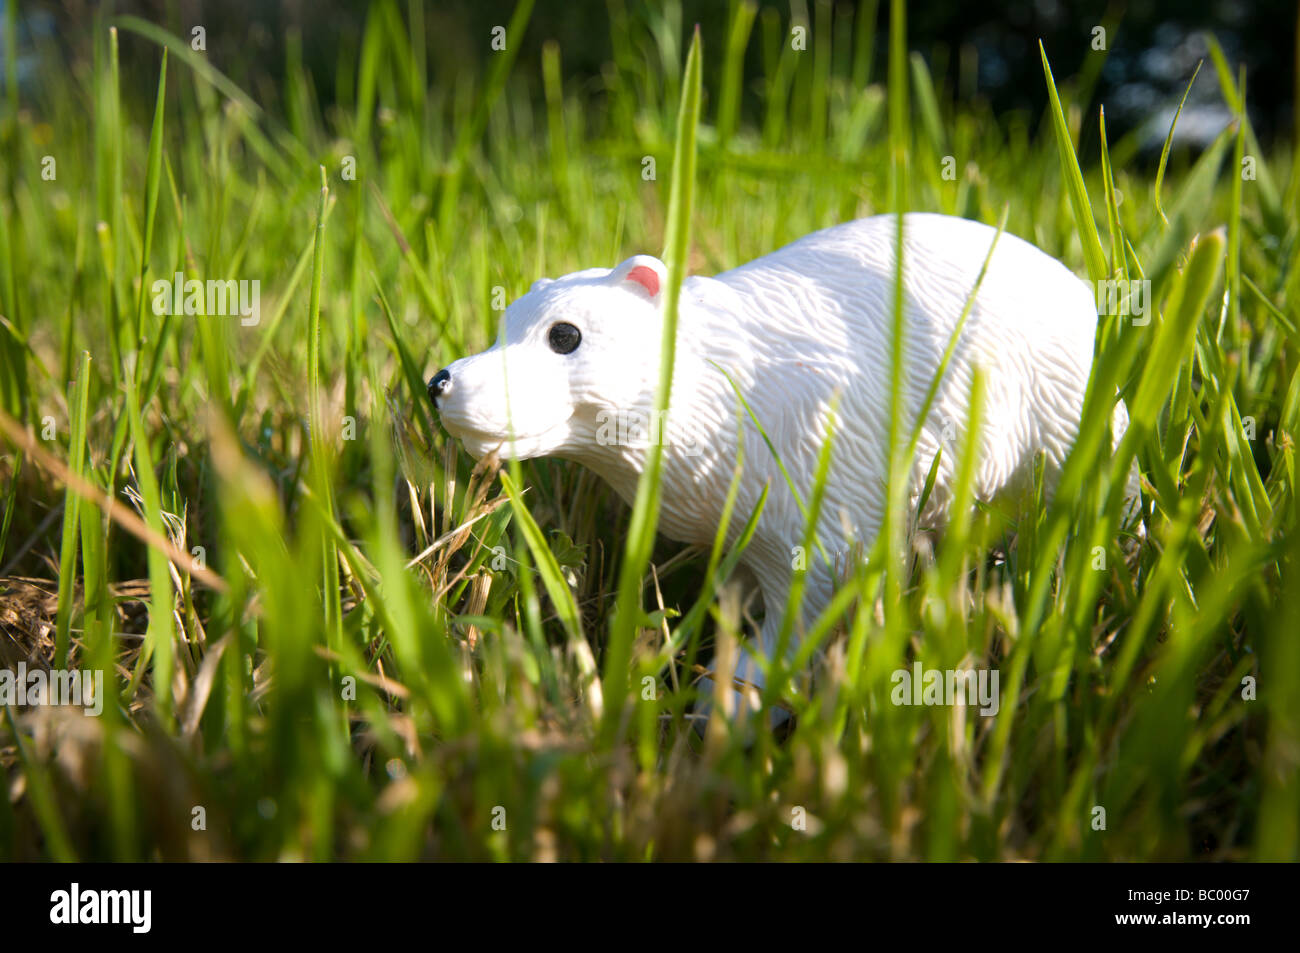 Toy polar bear in grass, Sunny weather Global Warming. Stock Photo